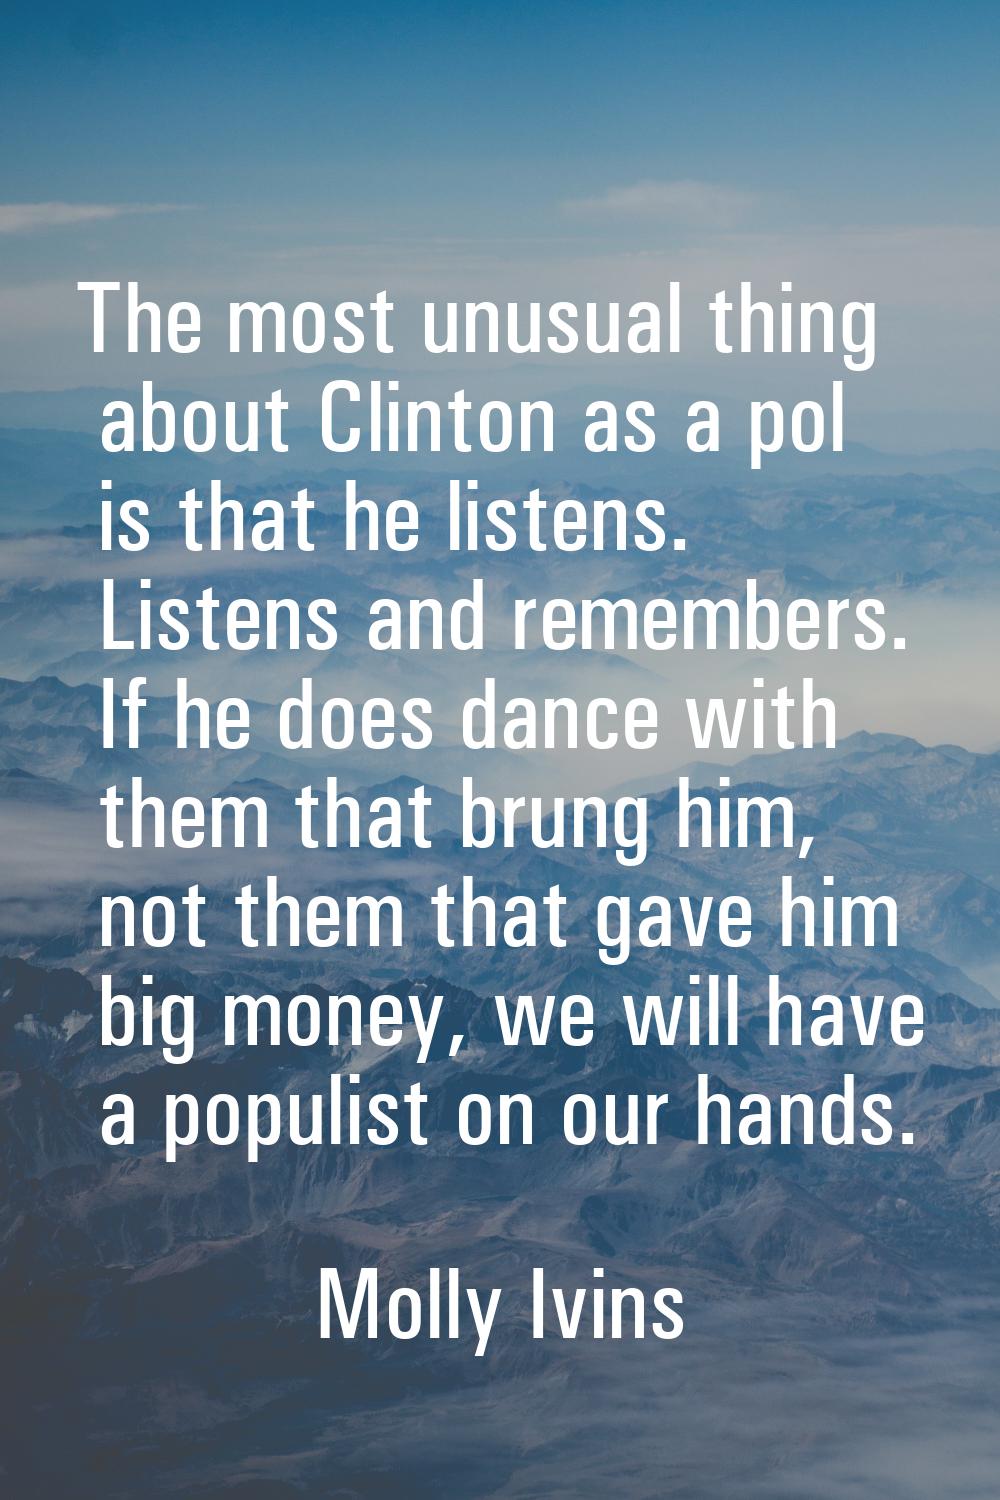 The most unusual thing about Clinton as a pol is that he listens. Listens and remembers. If he does